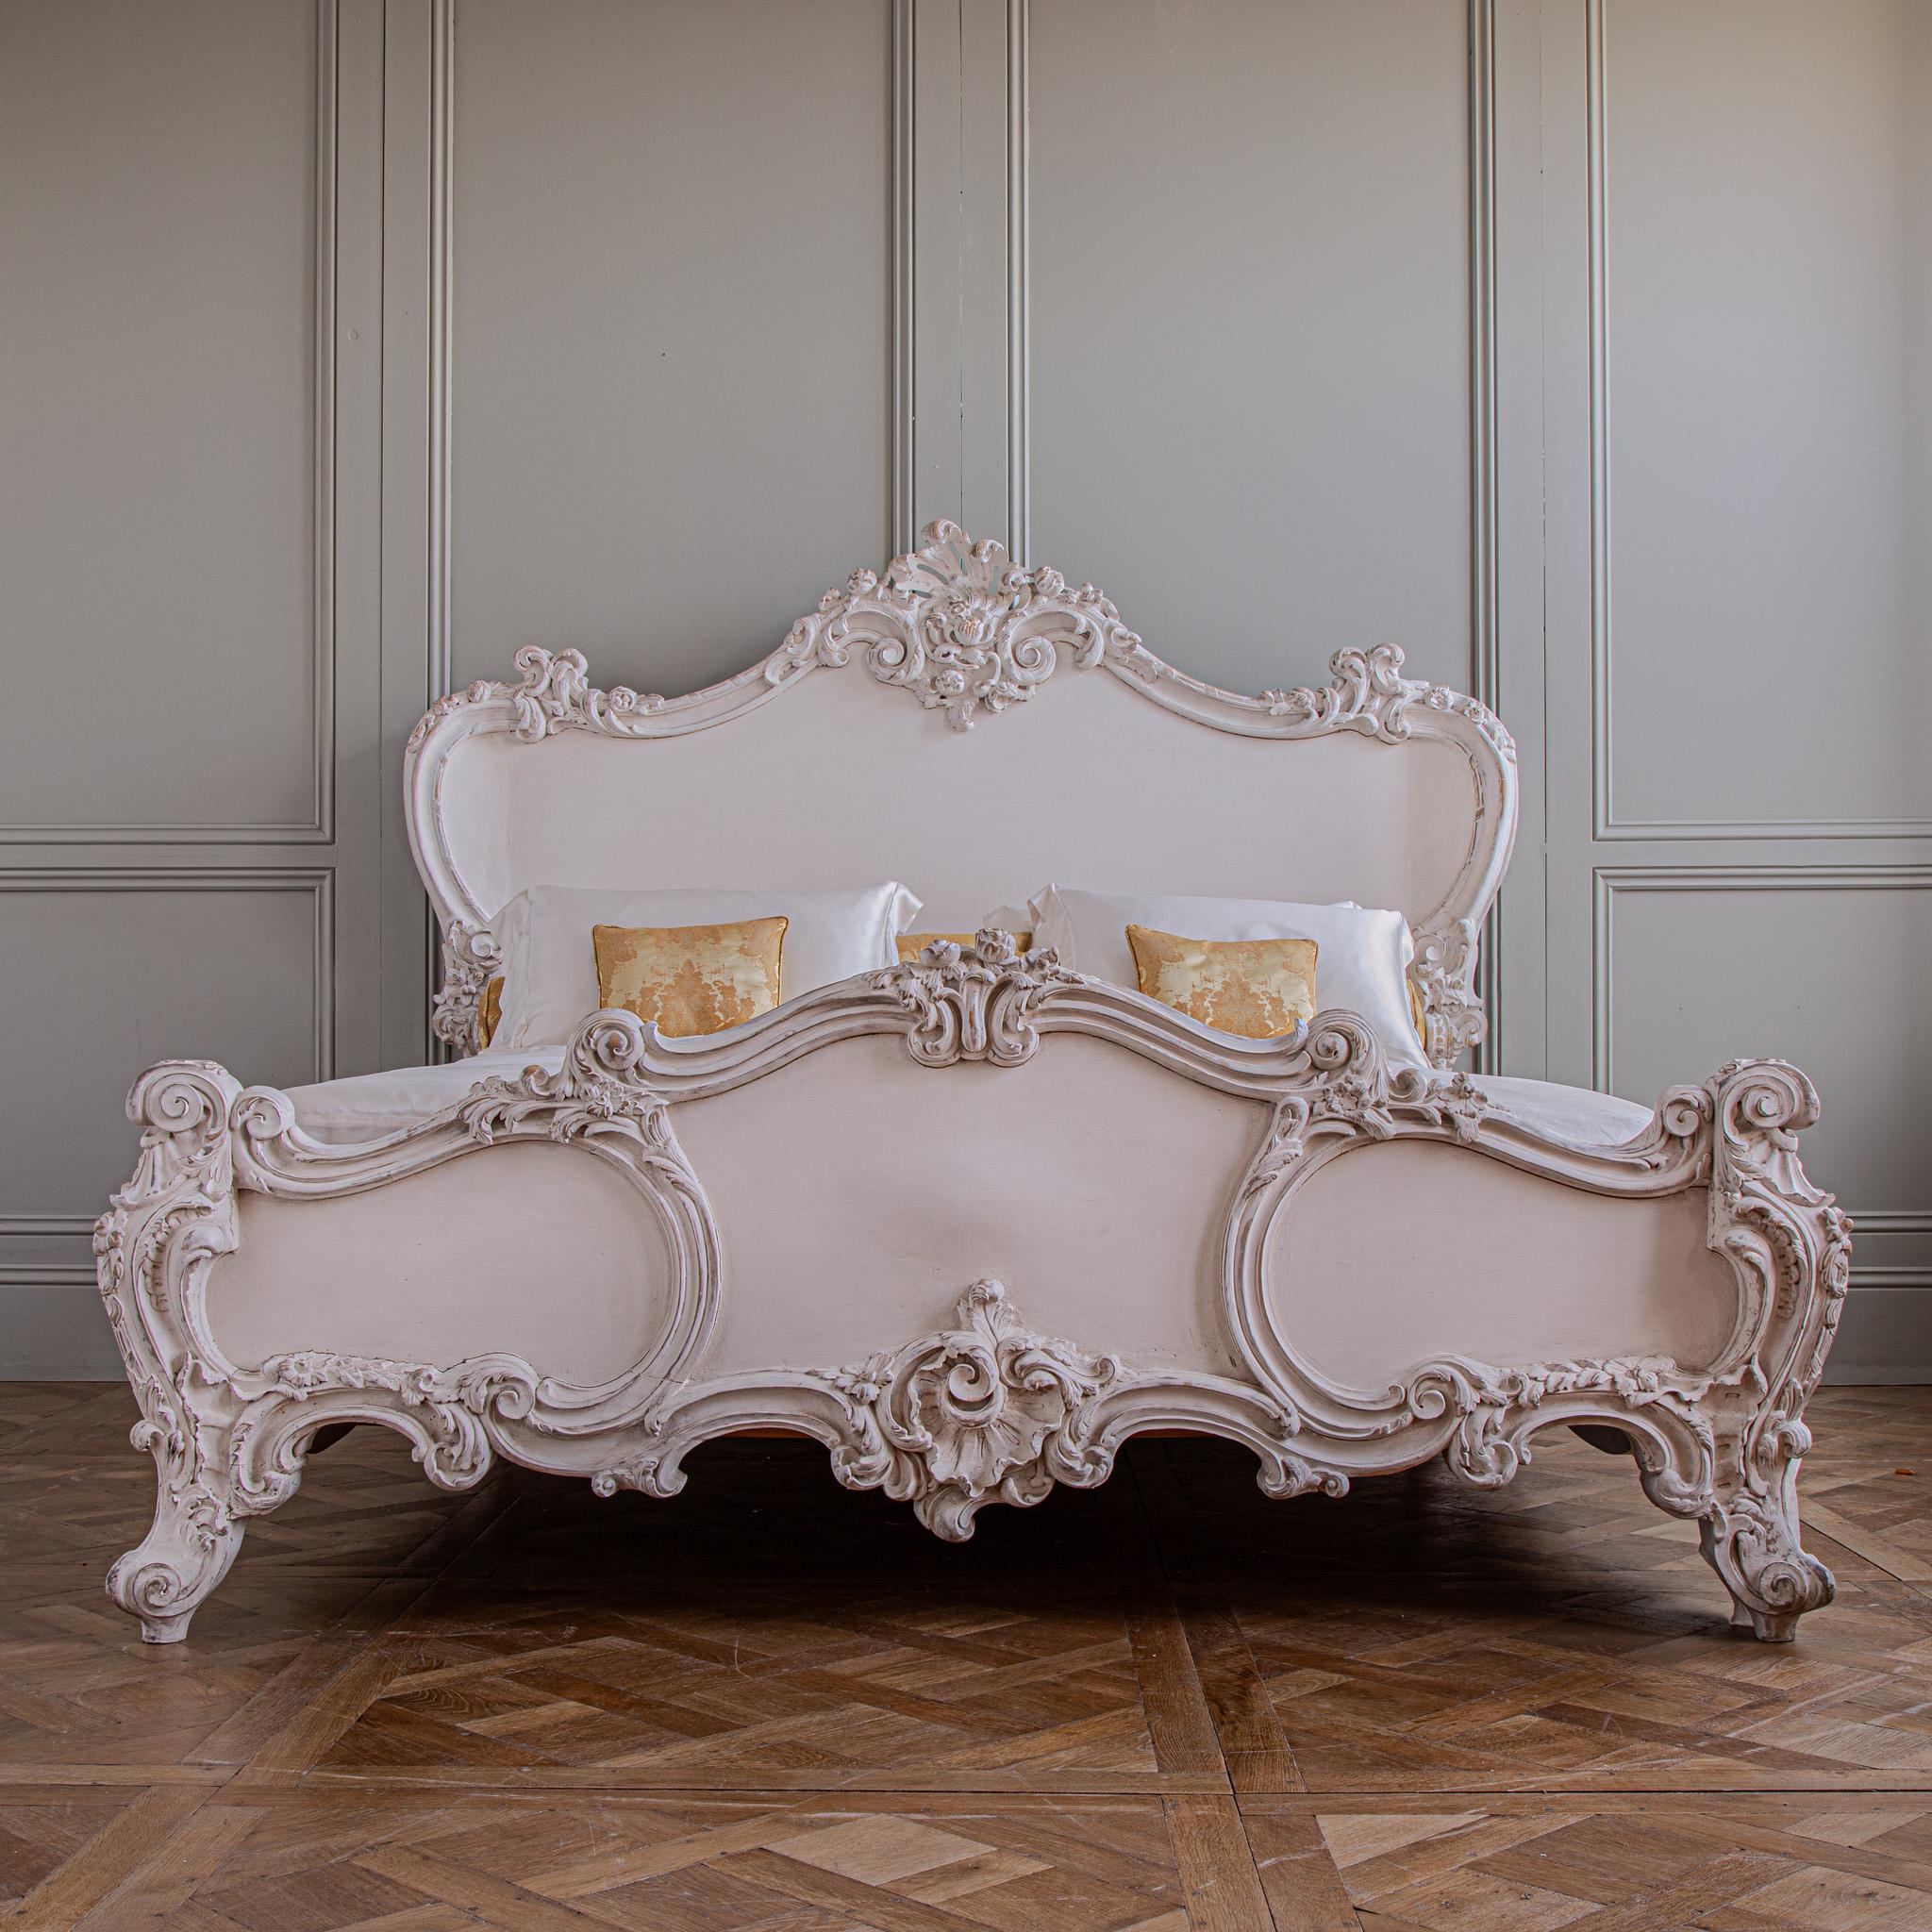 Contemporary A French Rococo Style 'Cherub' Bed Painted In White Gesso By La Maison London For Sale